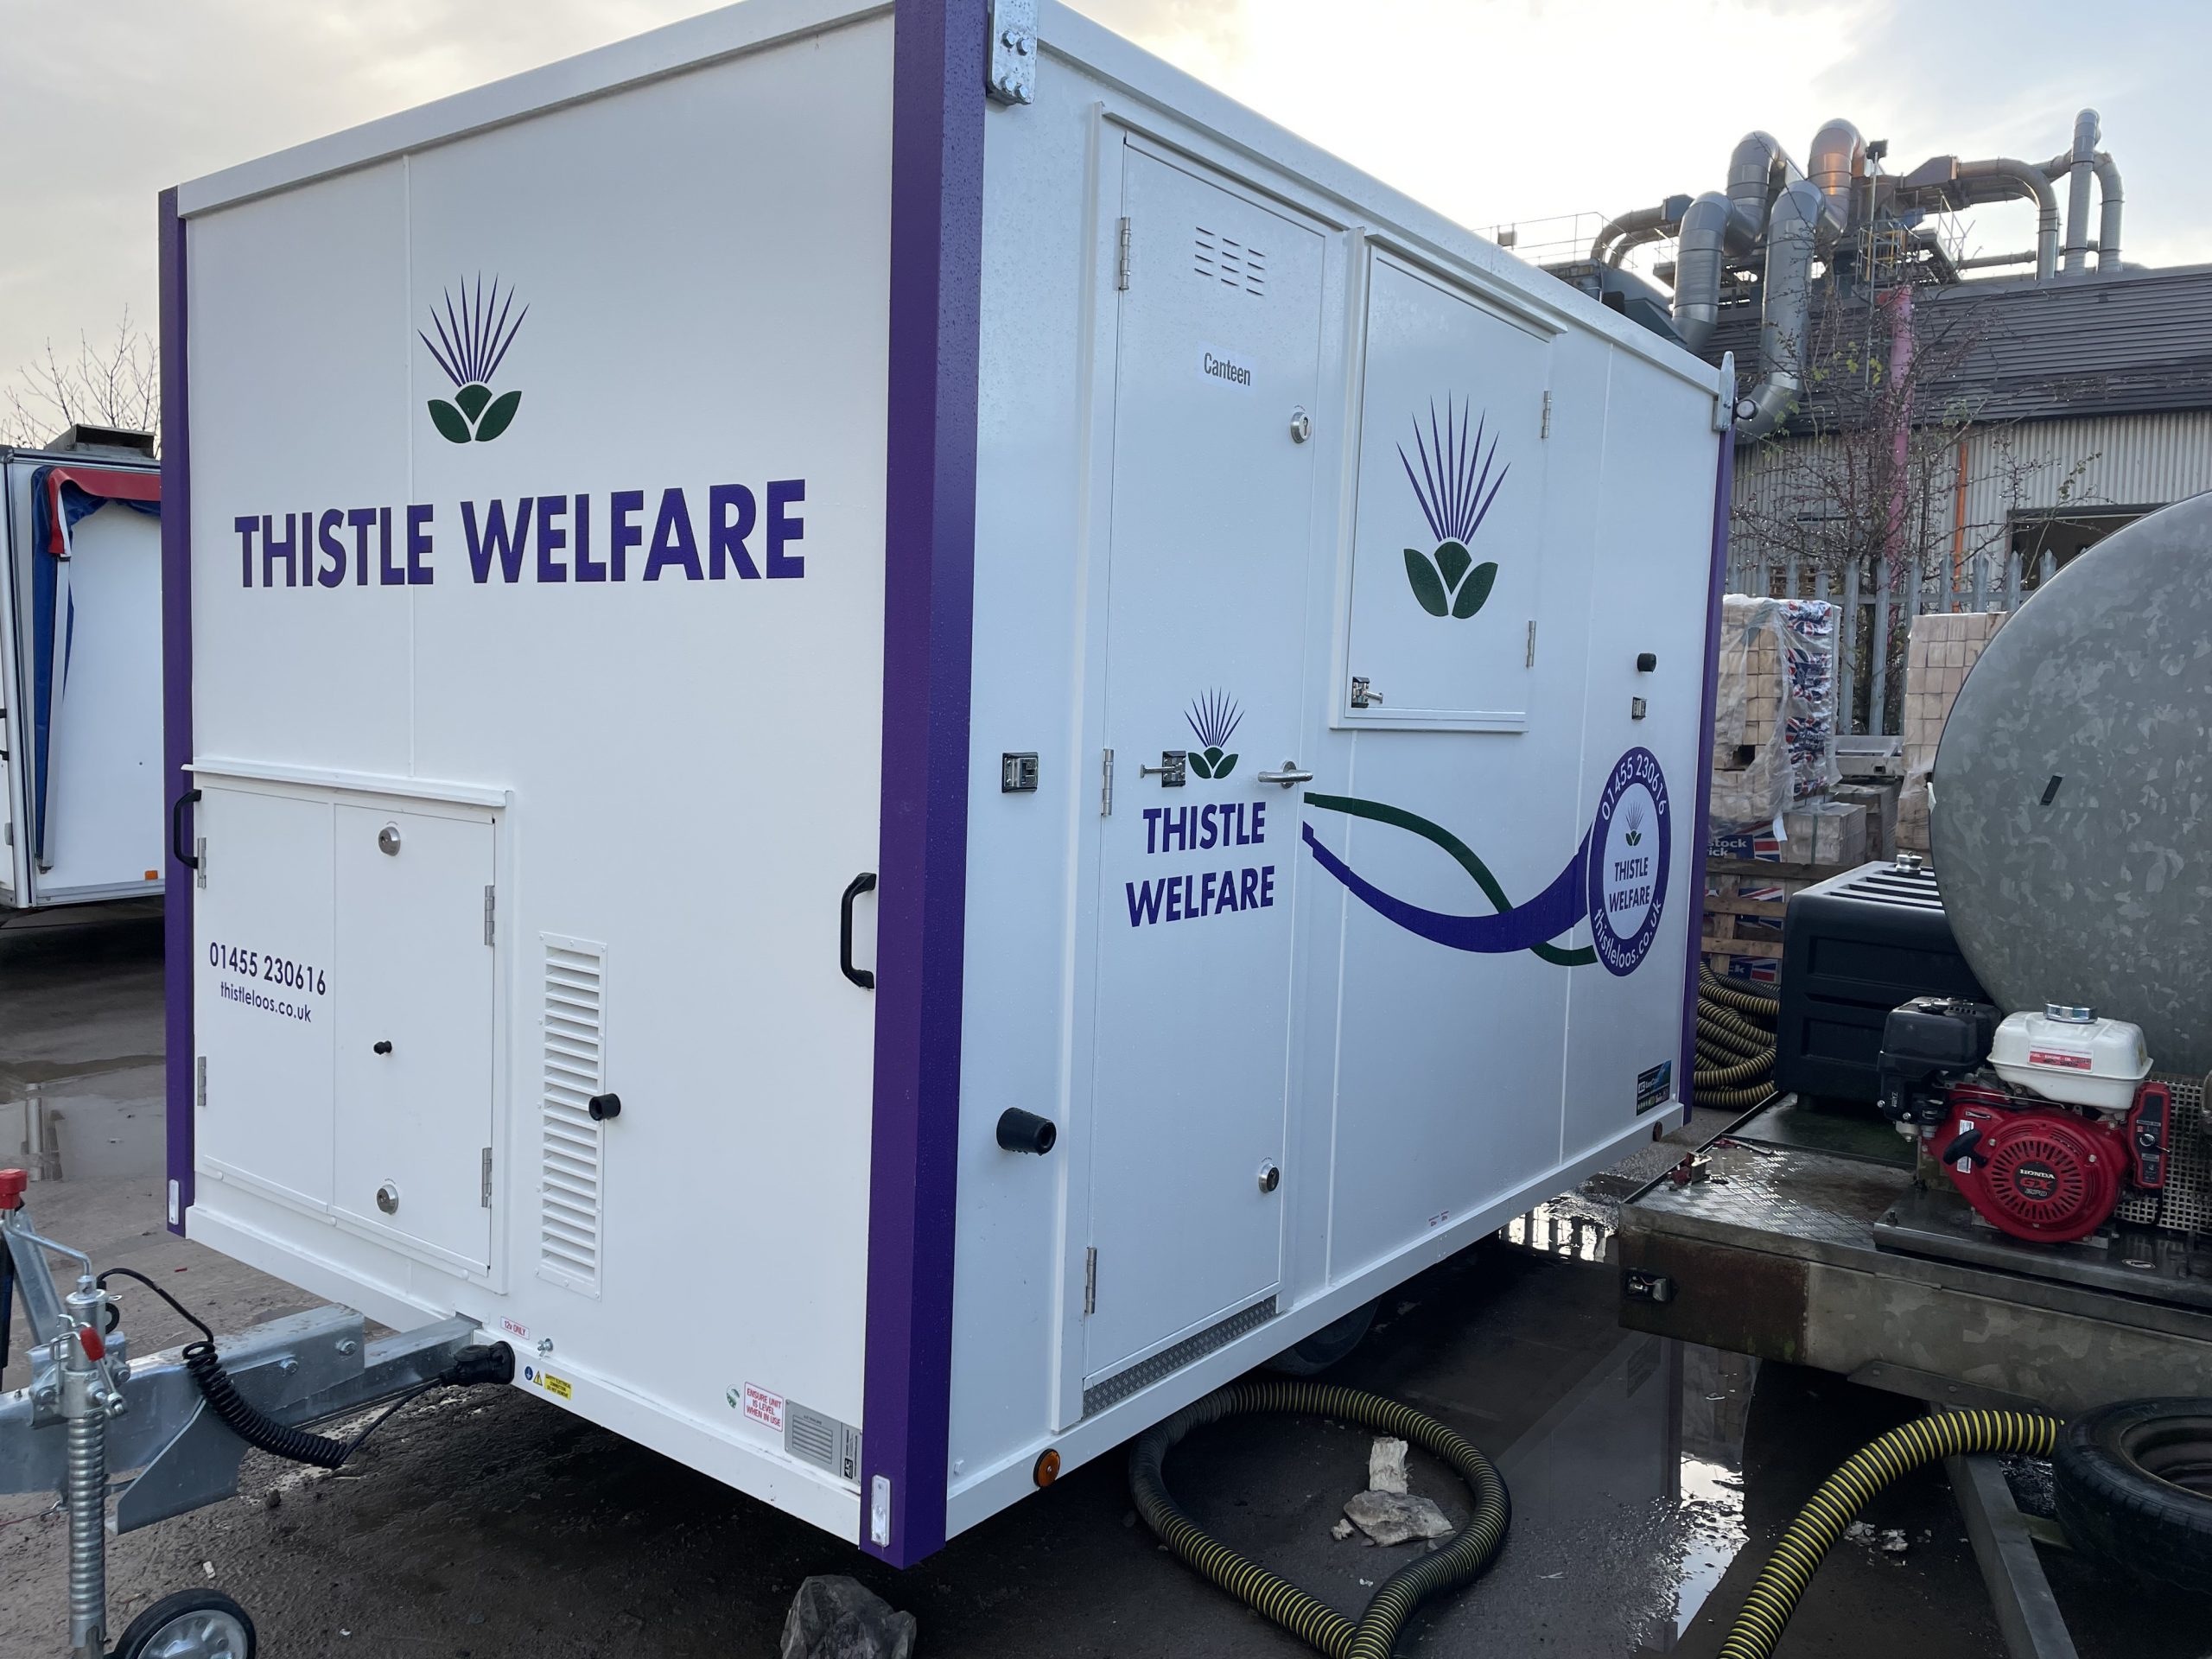 Thistle Loos welfare unit for hire